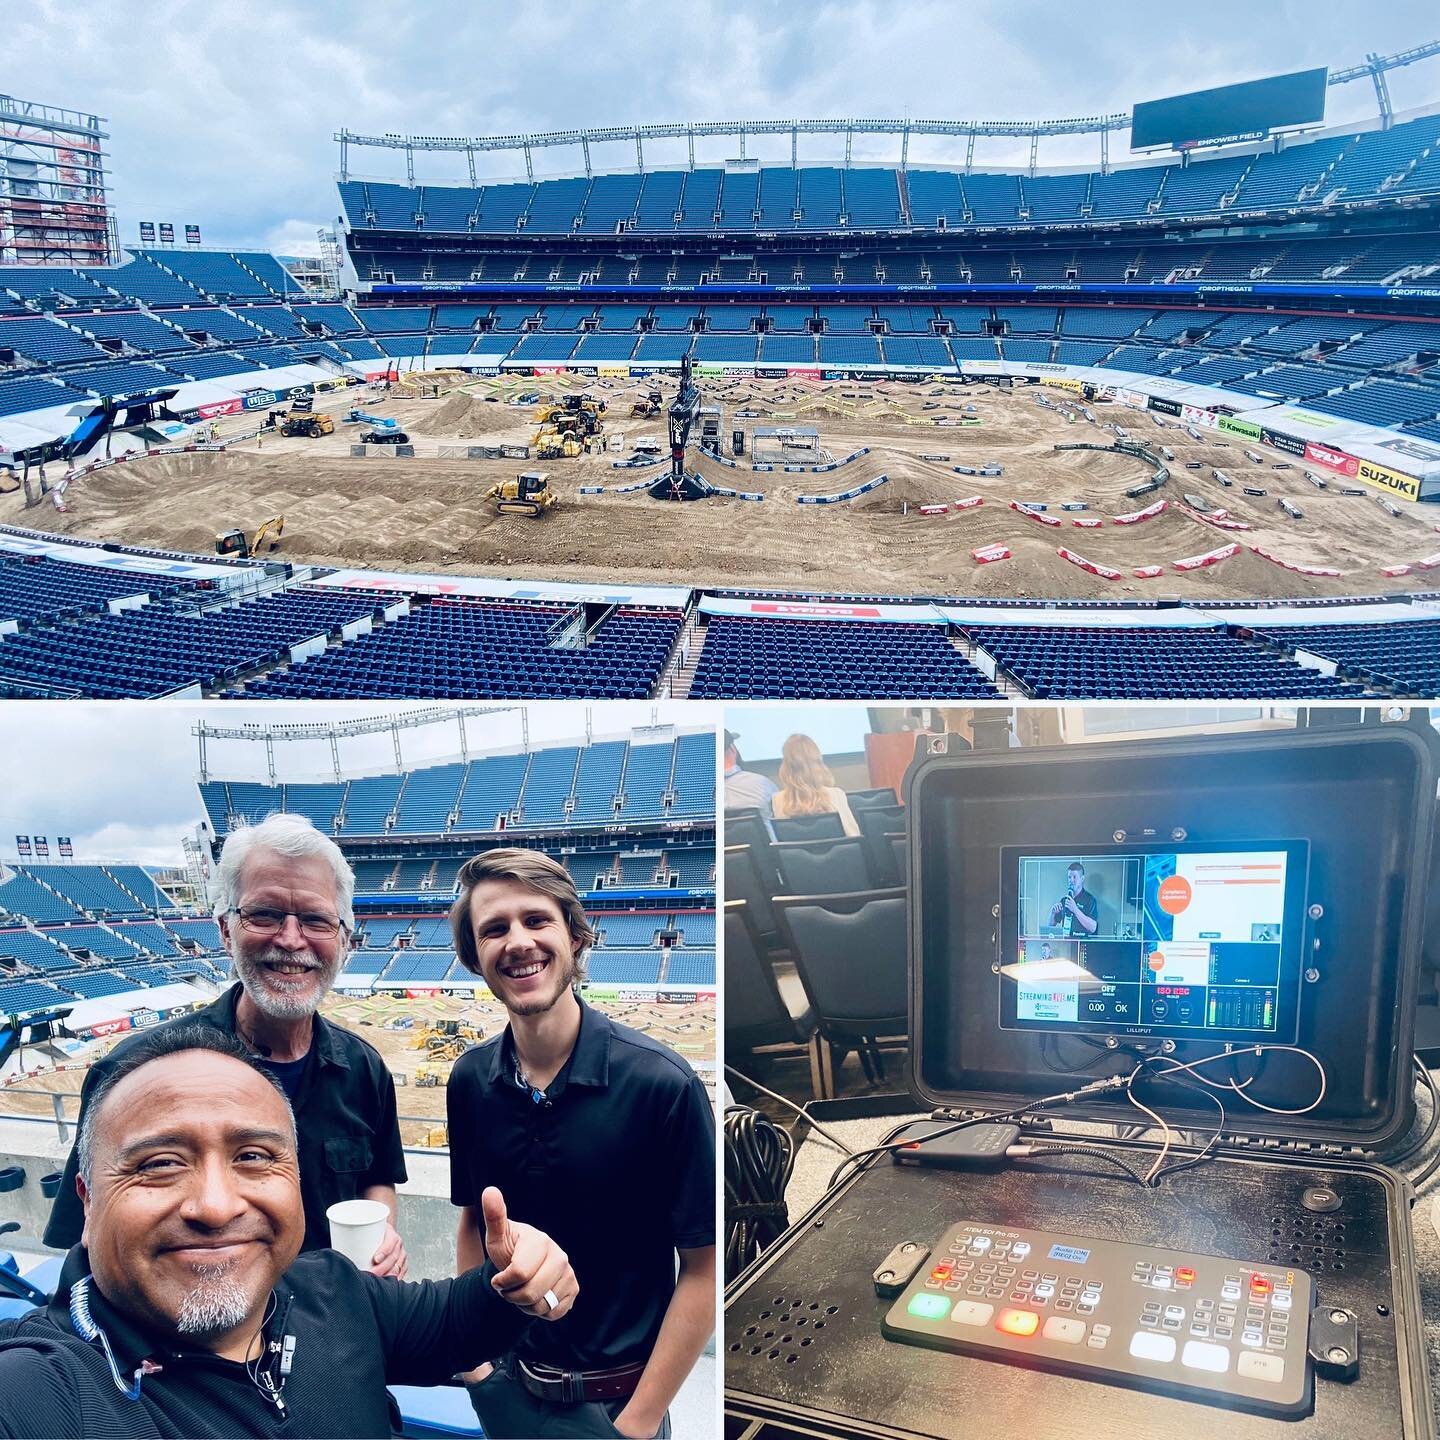 Another great day in the books with CAHED Trade Show and Conference at Mile High Stadium, great team and great event 🙌 We enjoy working with the Colorado Association of Healthcare Engineers and Directors #videoproducer #videoproductioncompany #video